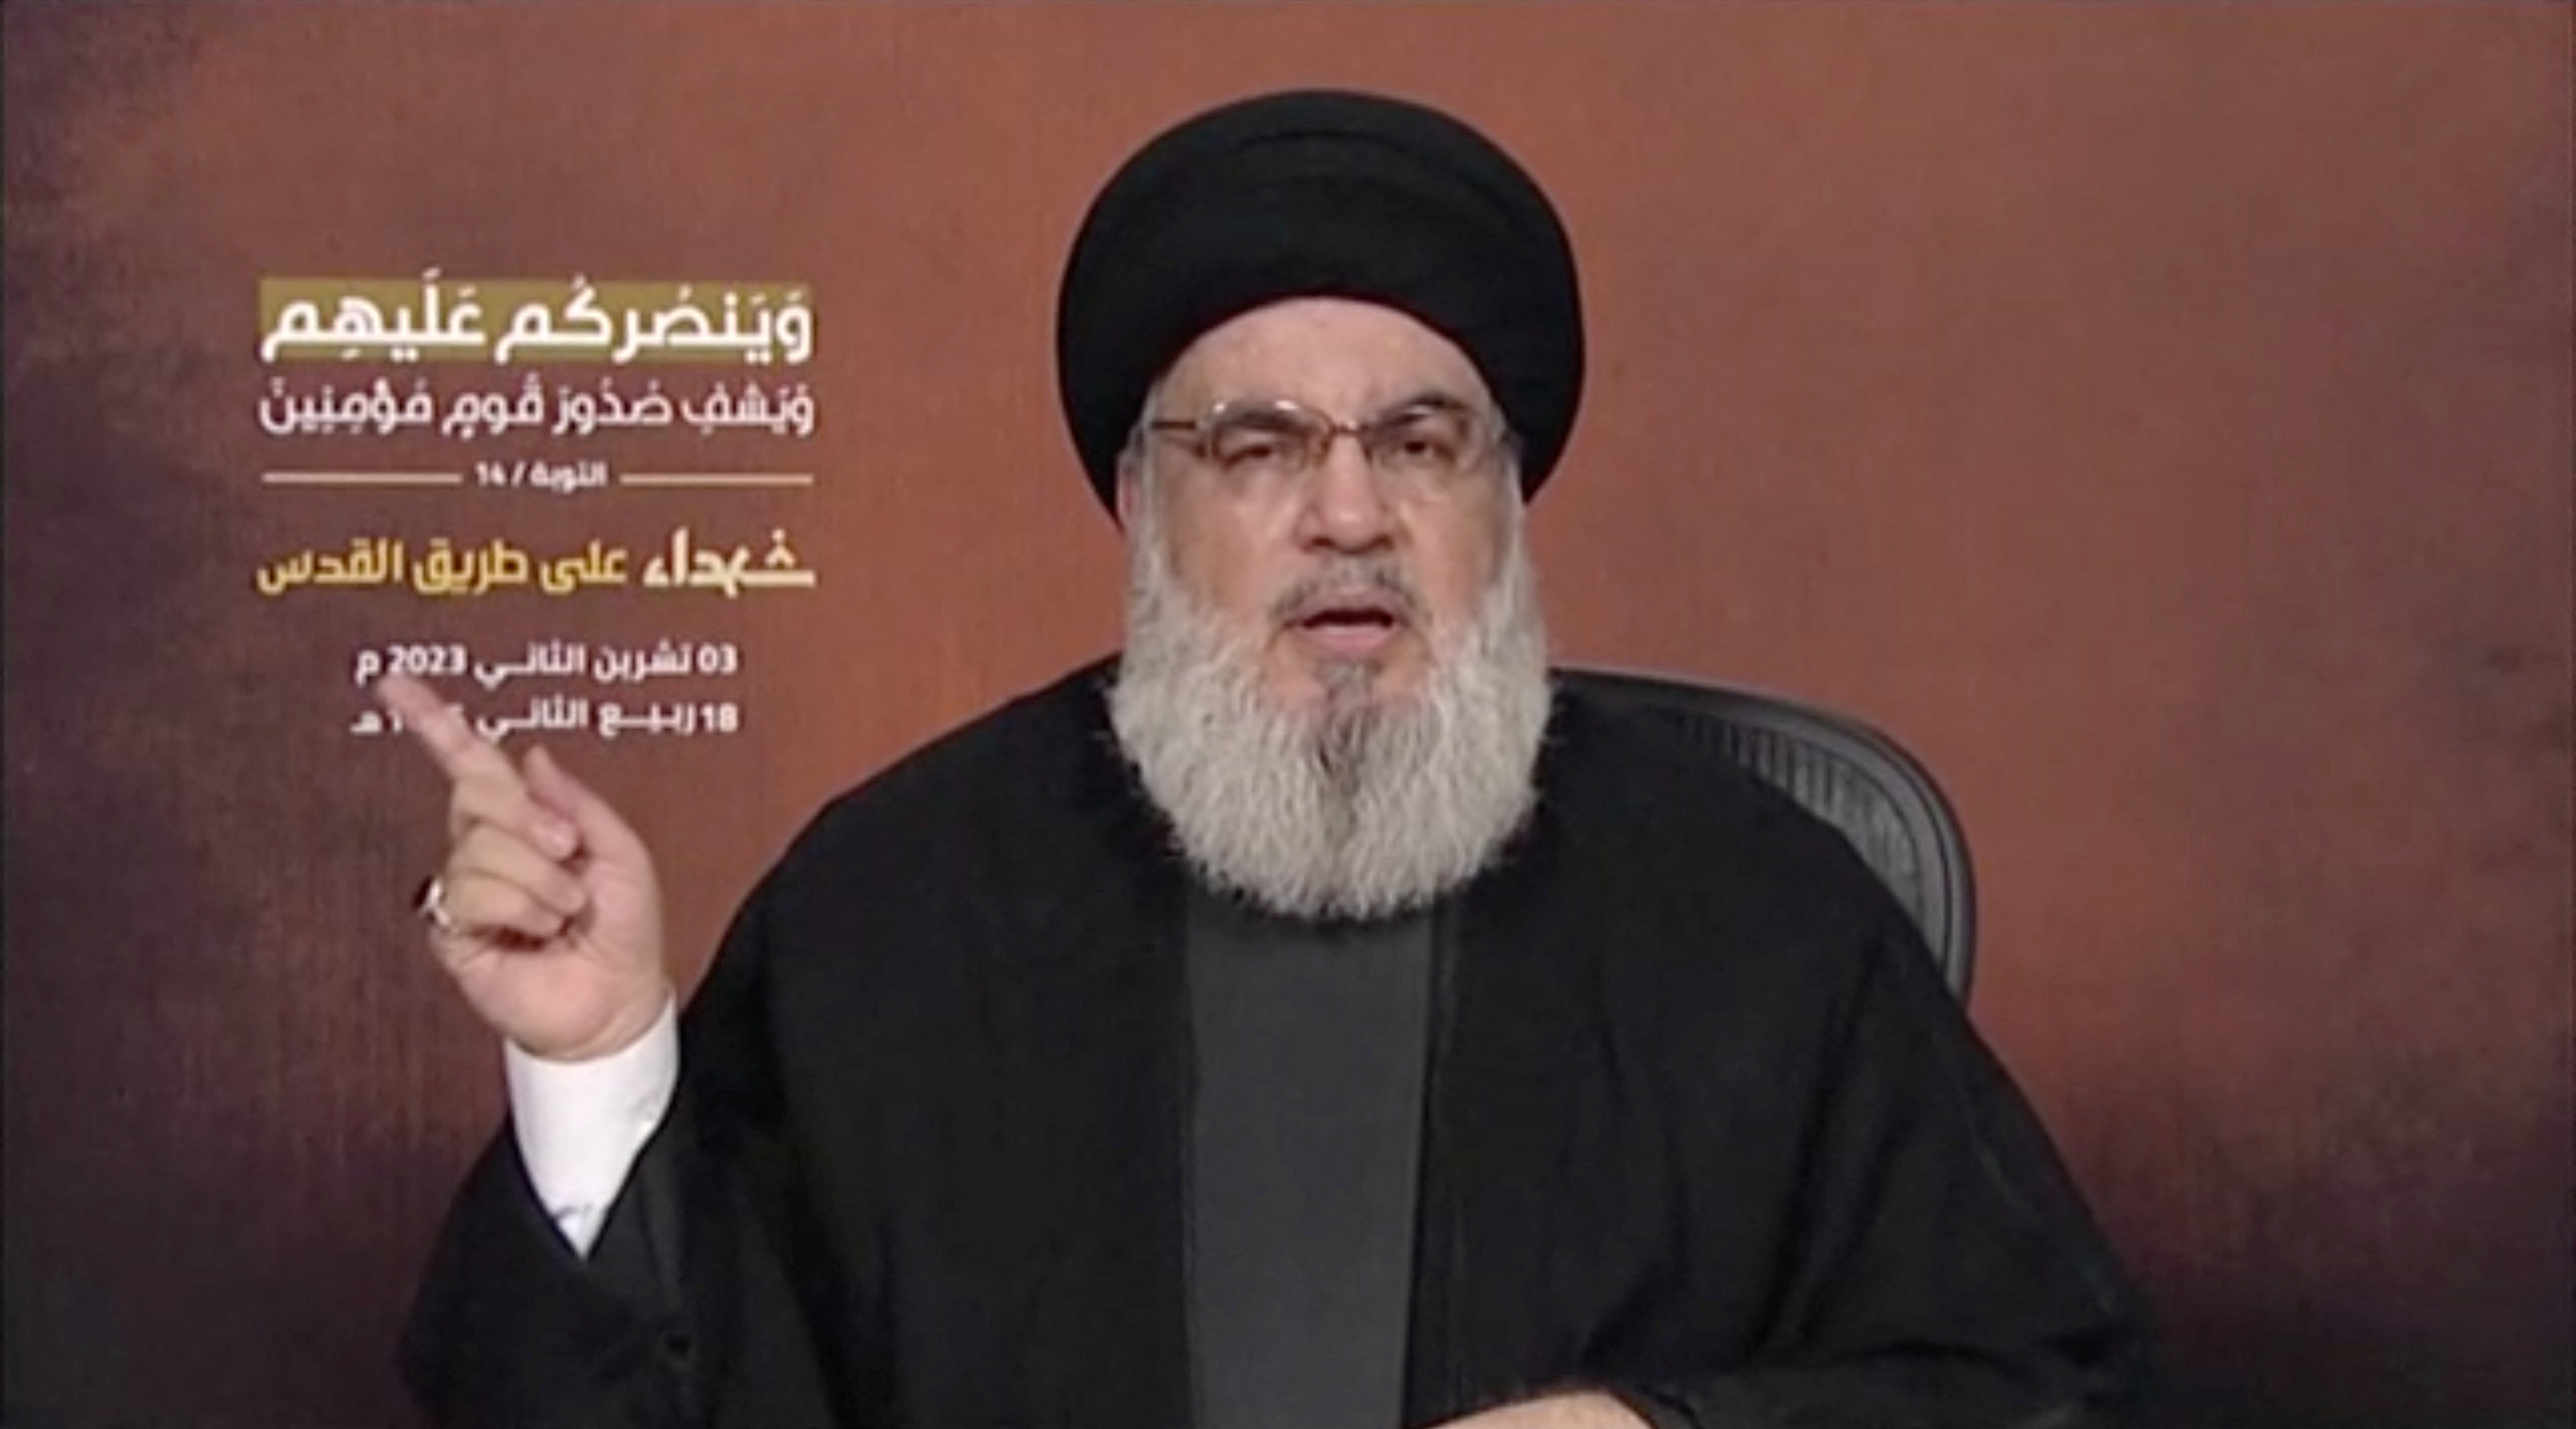 ‘This glorious, blessed large-scale operation was a hundred per cent Palestinian in terms of decision and execution,’ said Hezbollah leader Hassan Nasrallah